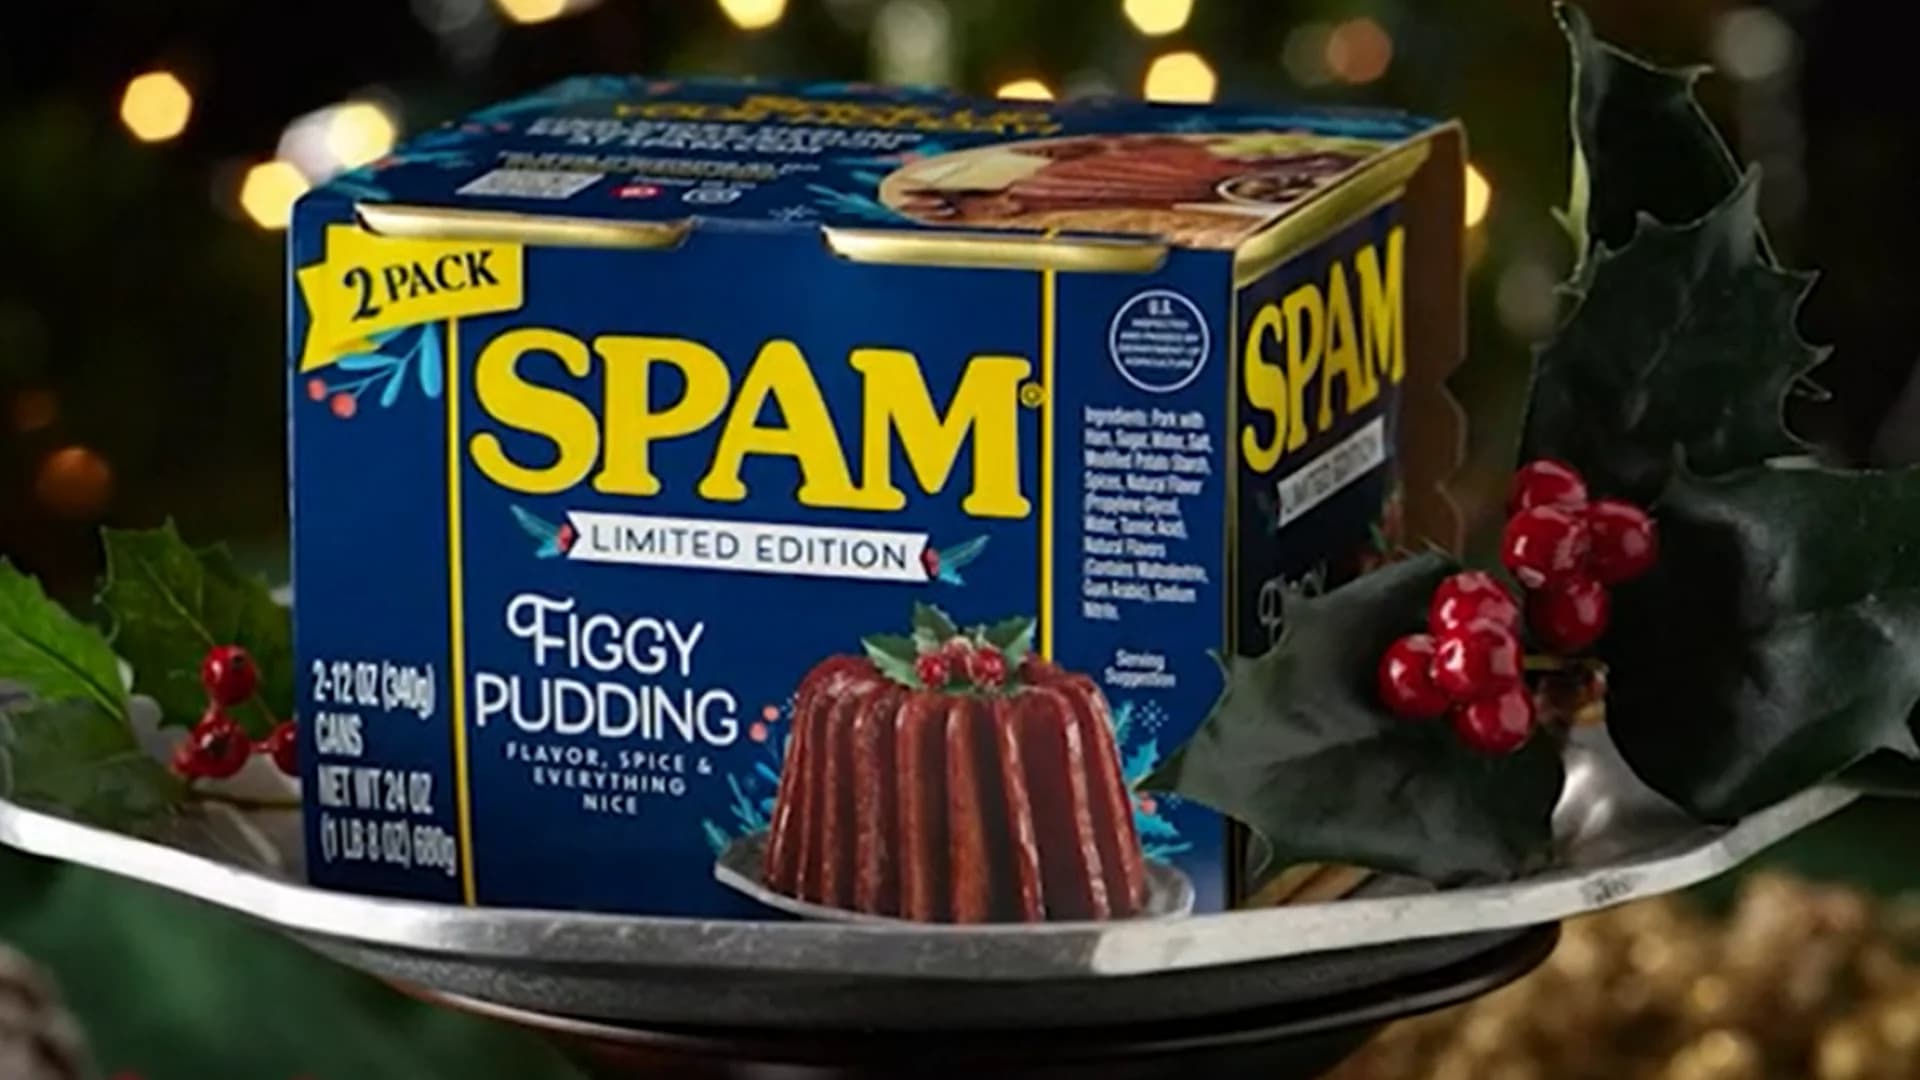 What's Hot: Spam introduces figgy pudding flavor for holidays